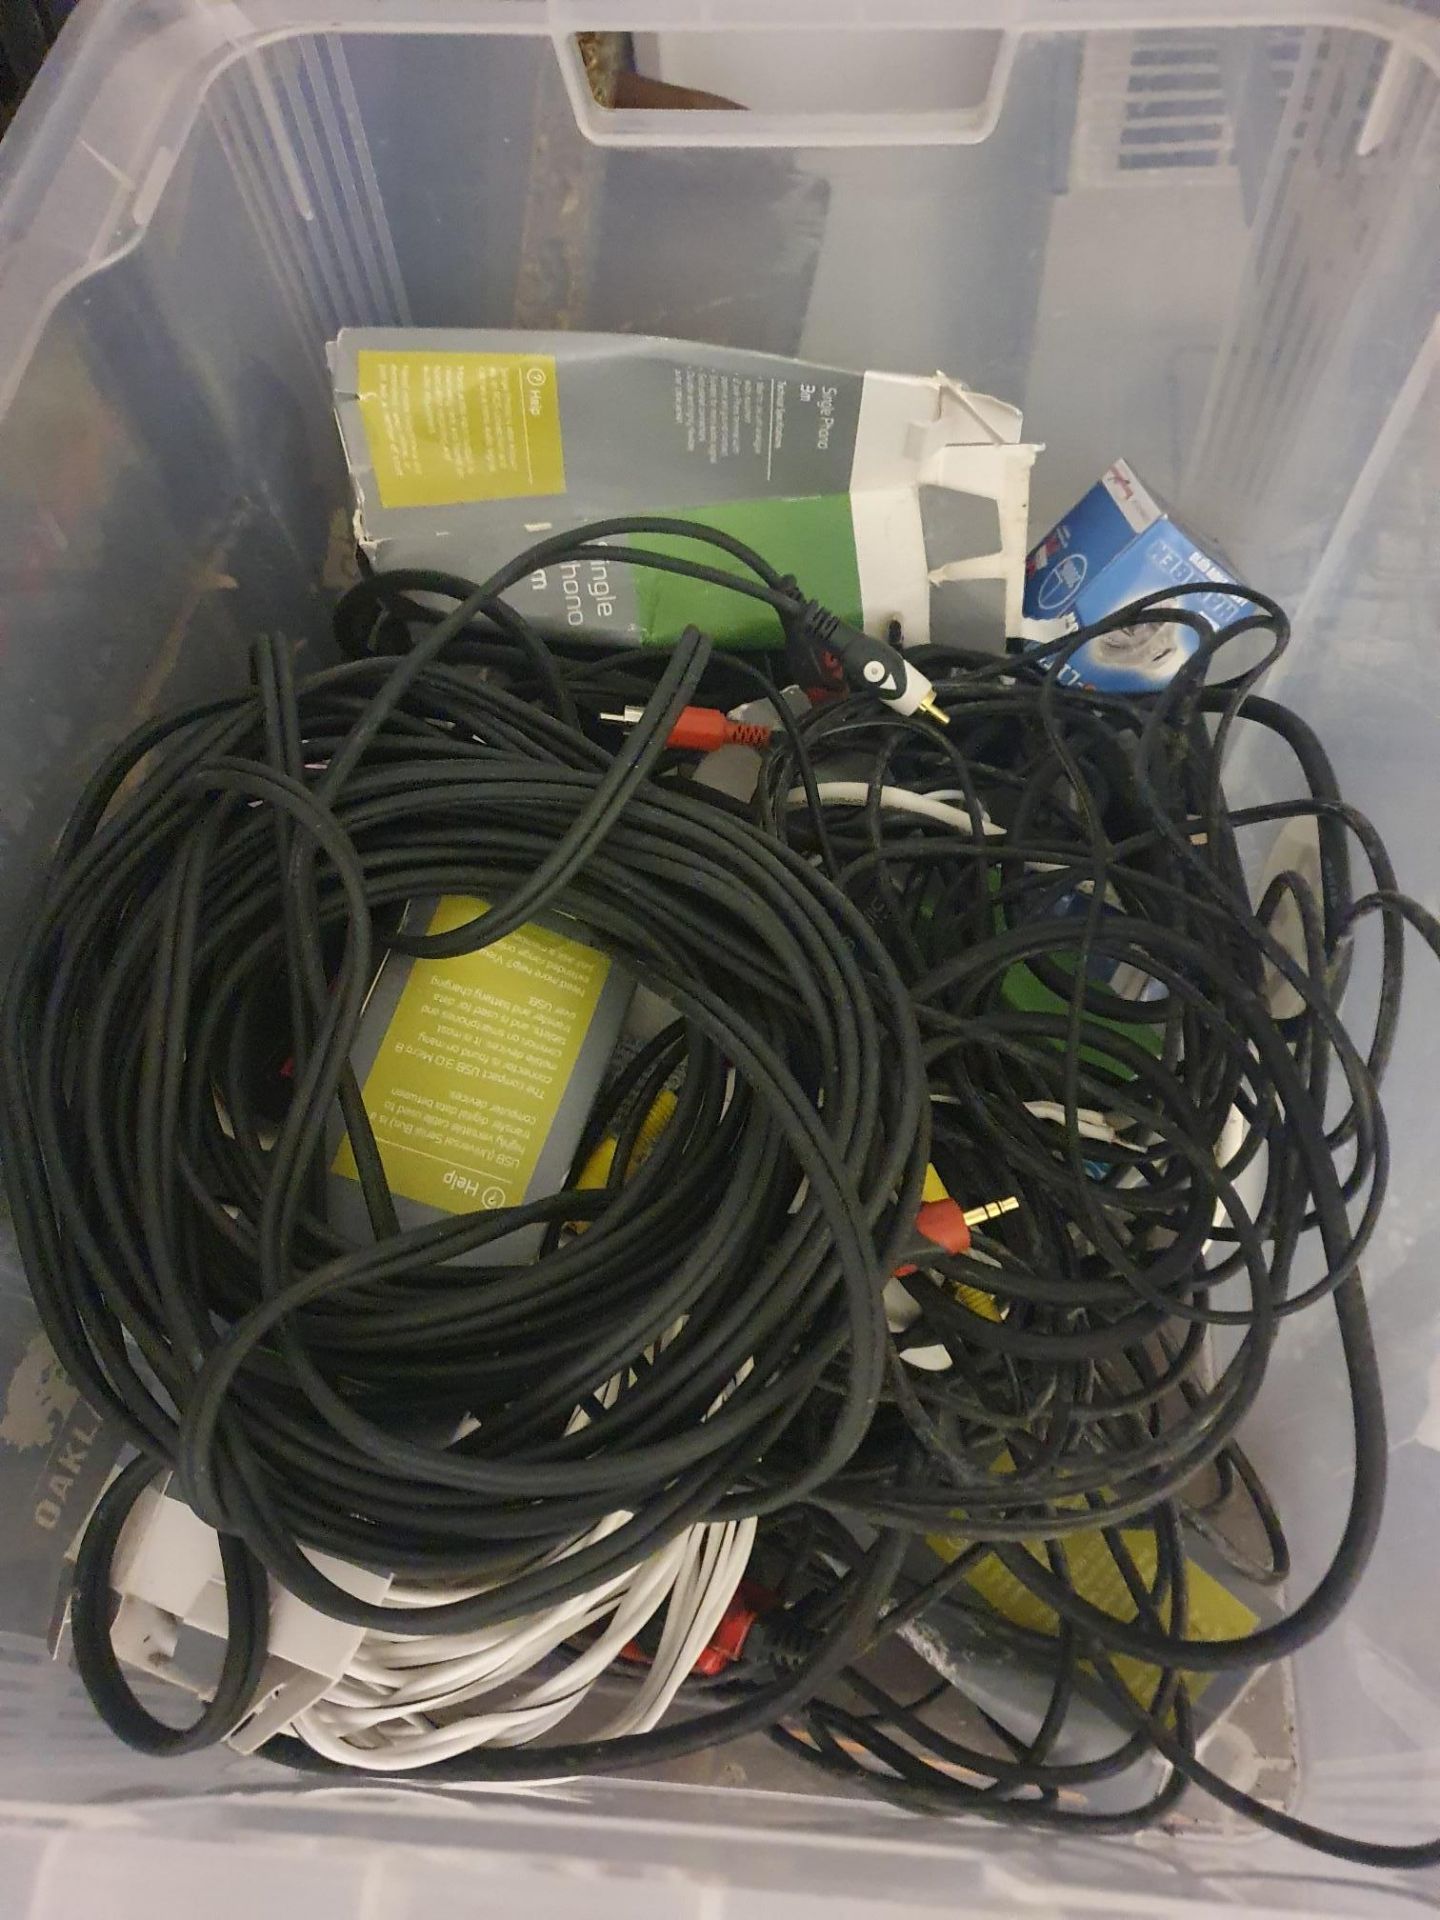 Boxlot of leads, cables etc